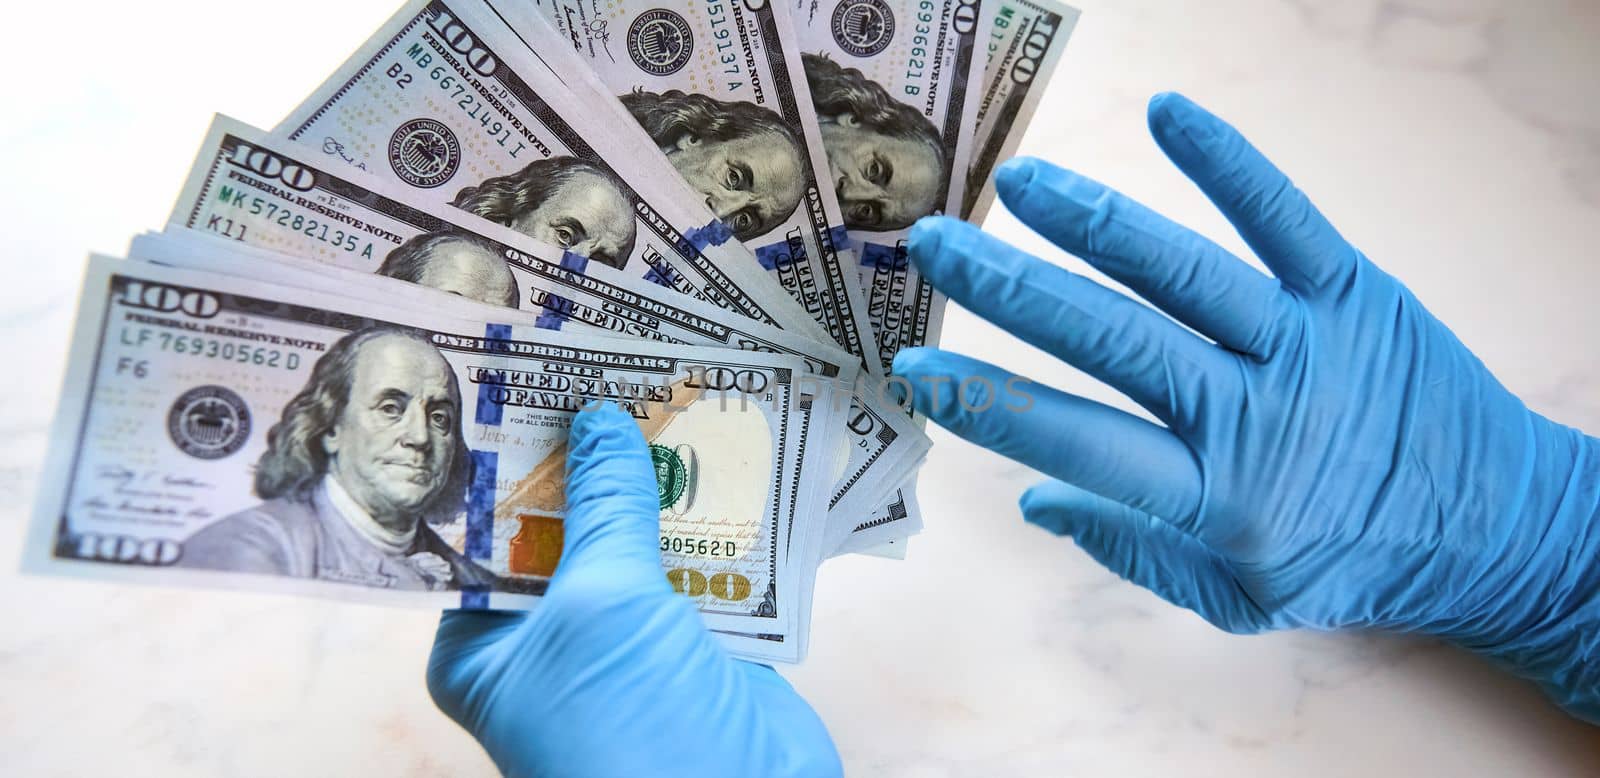 secure money transfer. hand in a rubber glove takes money. hands in sterile medical gloves.